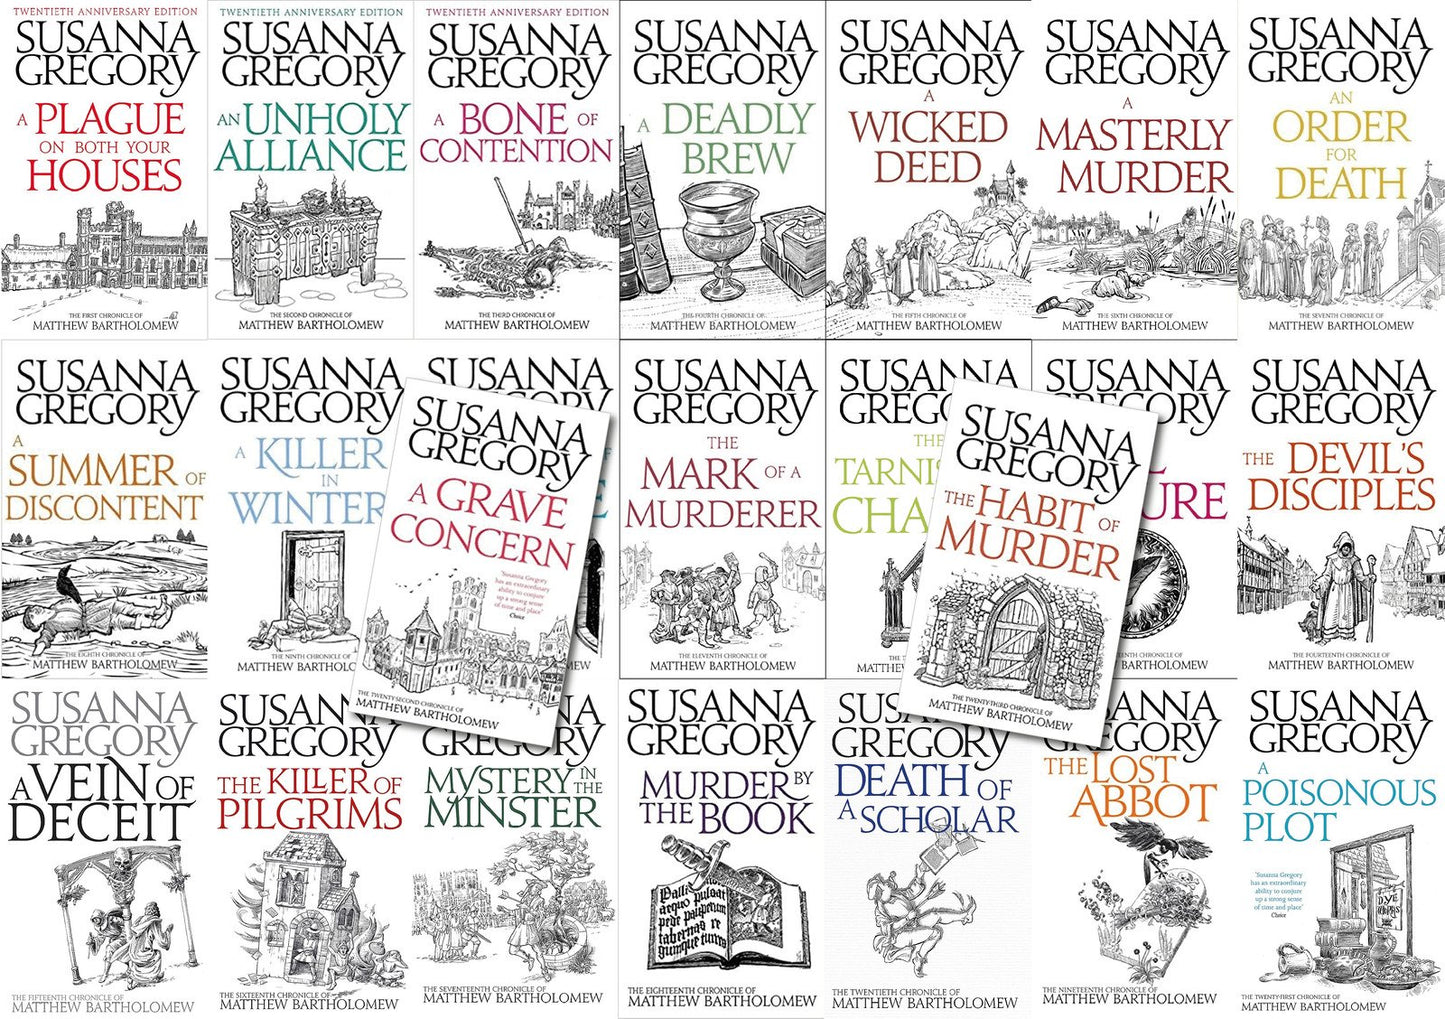 The Matthew Bartholomew Series by Susanna Gregory ~ 24 MP3 AUDIOBOOK COLLECTION